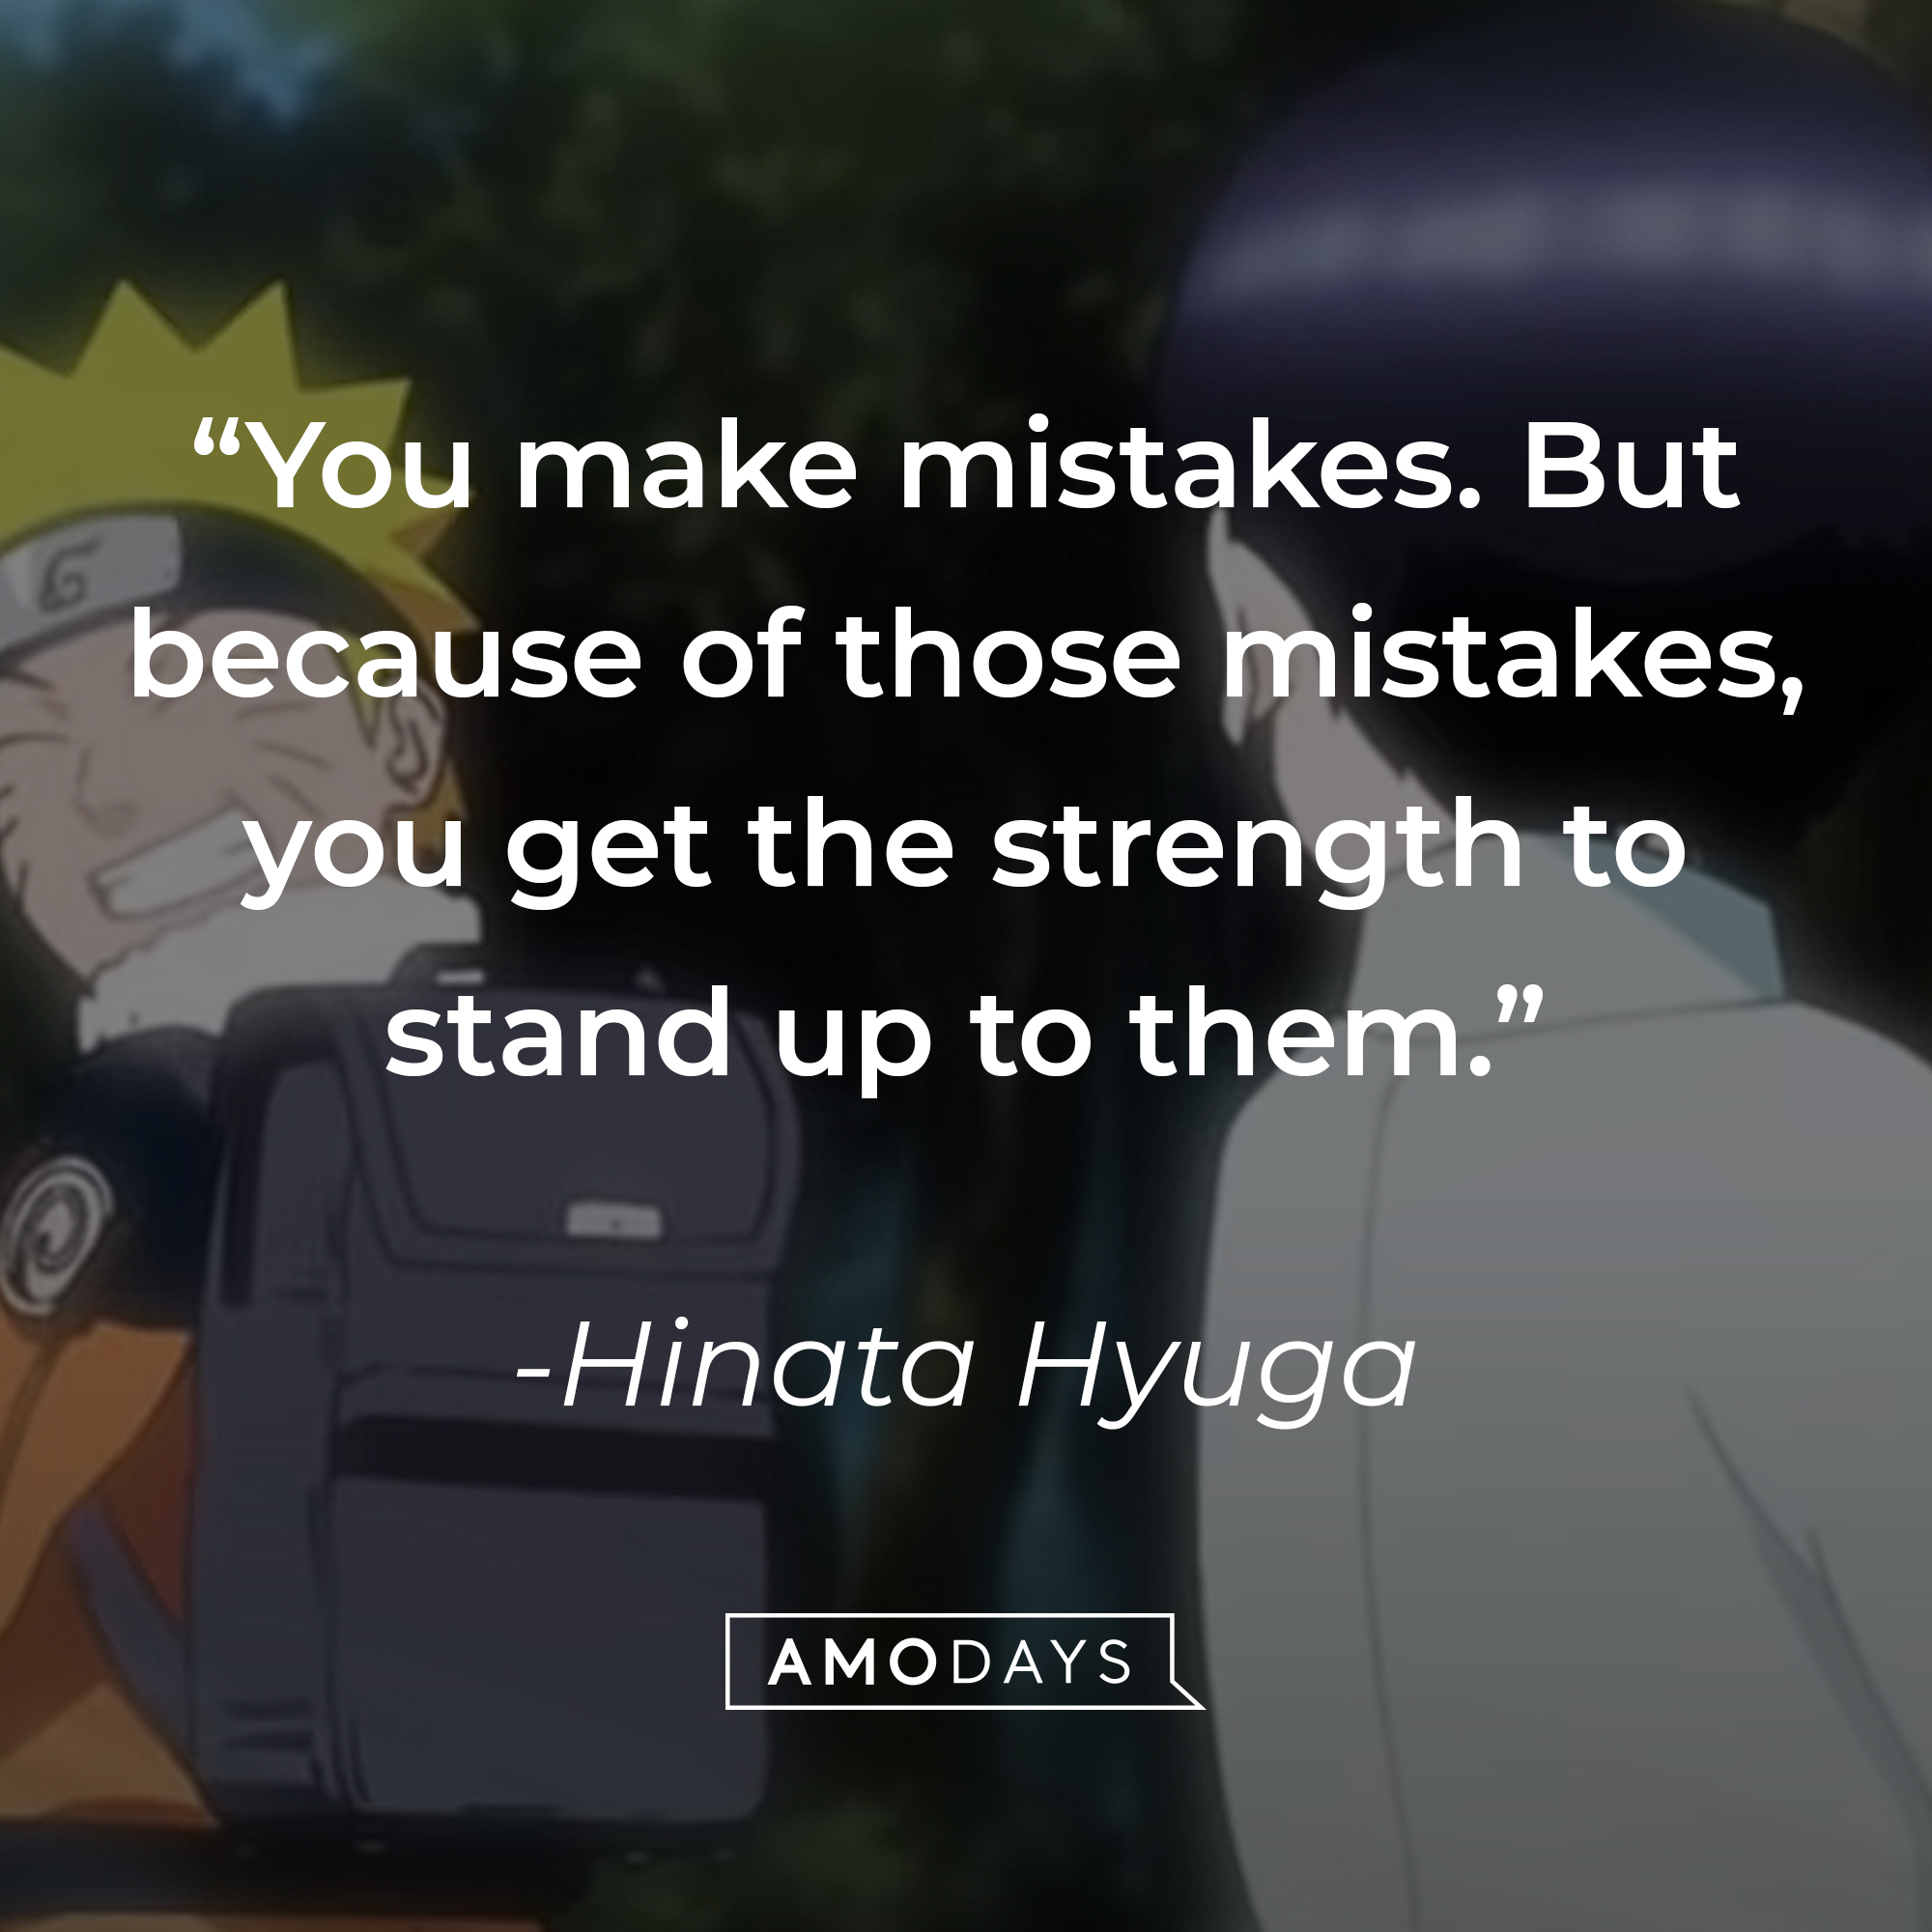 Hinata Hyuga and Naruto with her quote: “You make mistakes. But because of those mistakes, you get the strength to stand up to them. That's why I think you are truly strong!" | Source: youtube.com/CrunchyrollCollection